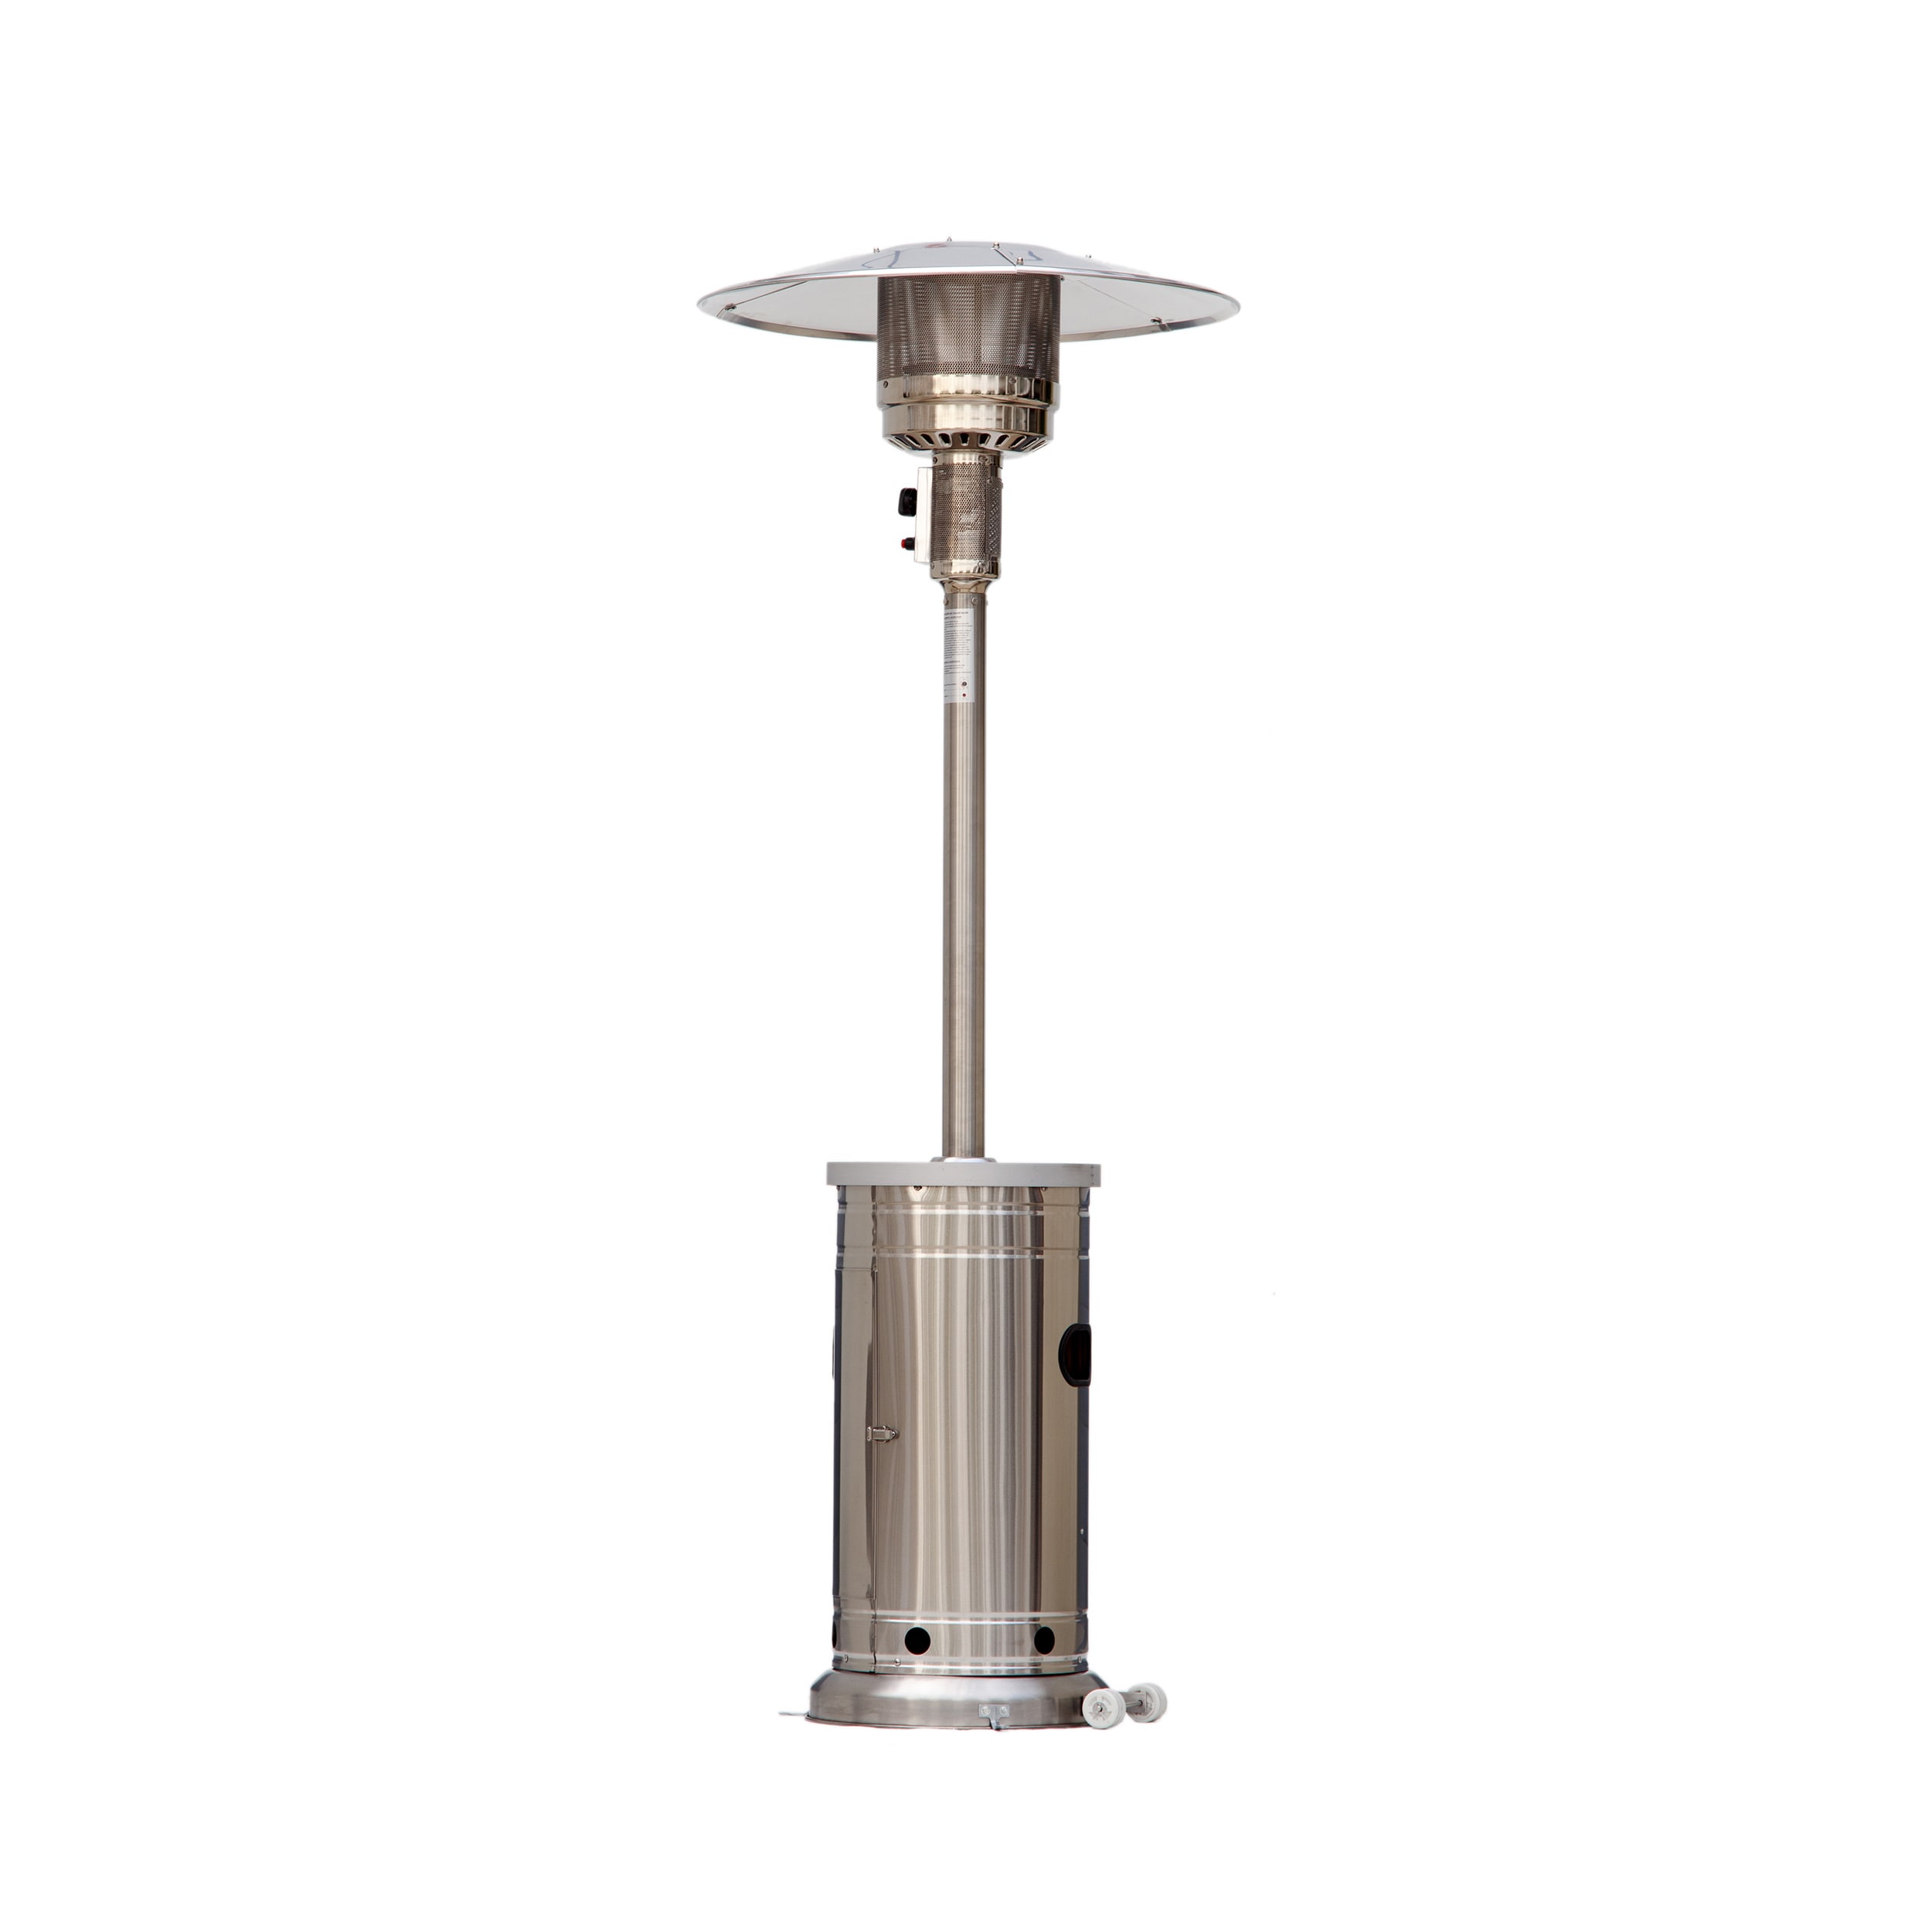 Patio Heaters & Accessories at Lowes.com